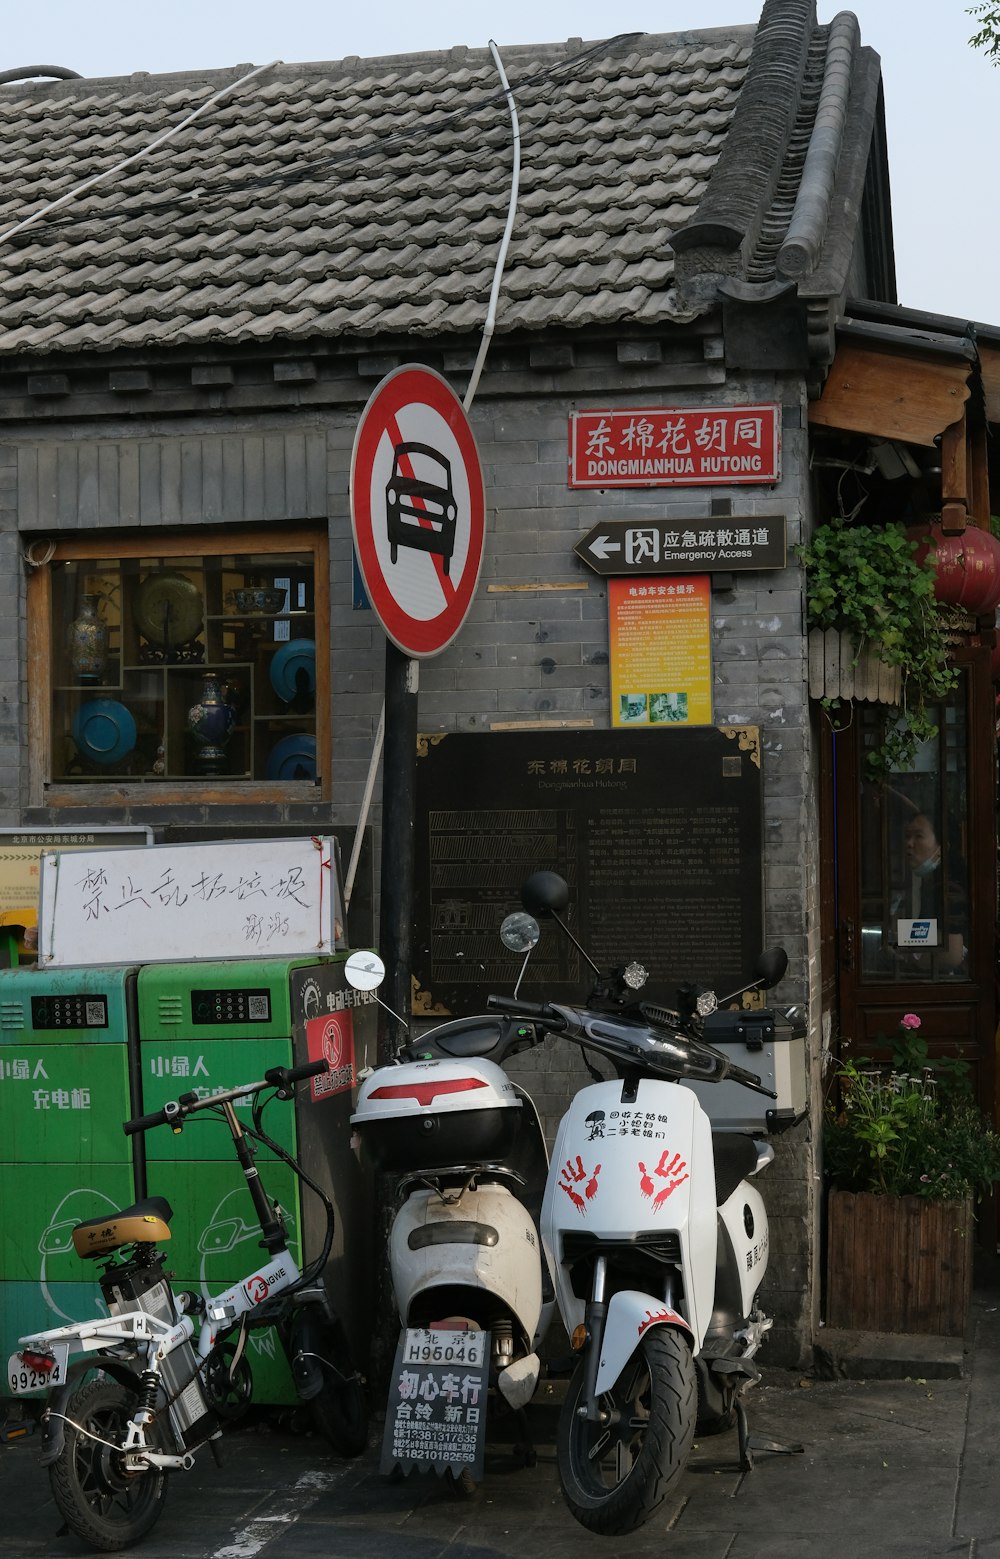 a couple of scooters parked in front of a building